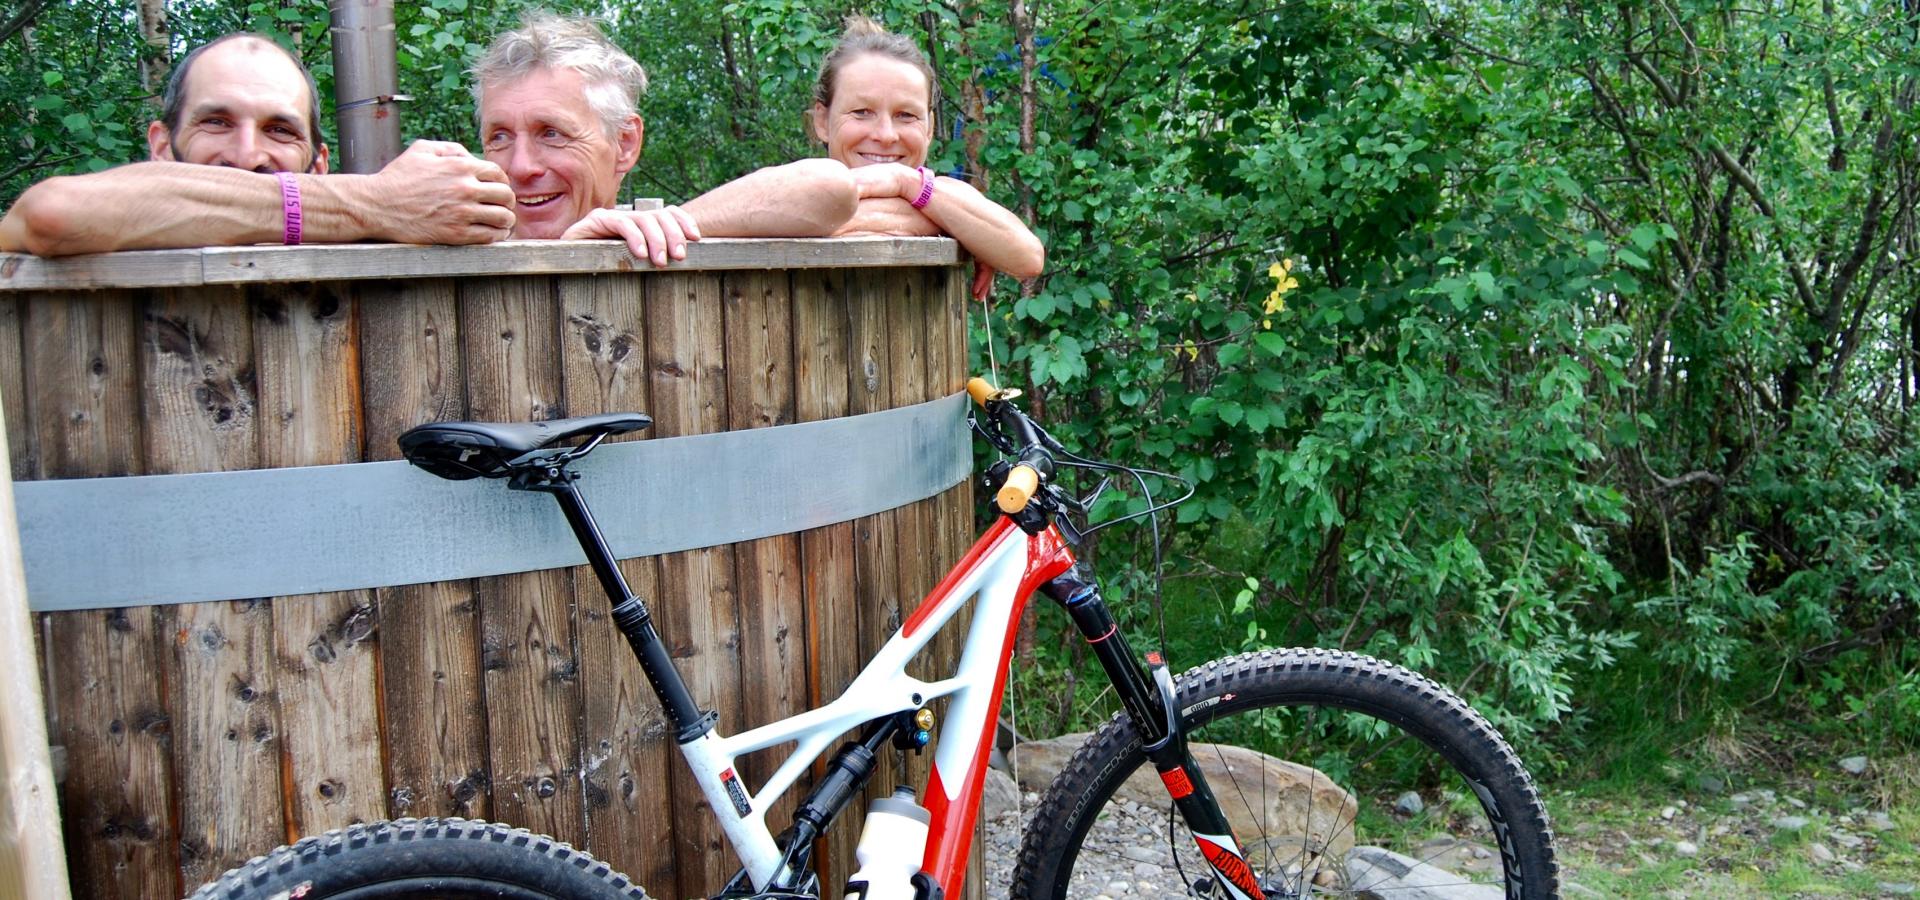 3 people in the hot tub and a mountain bike in front